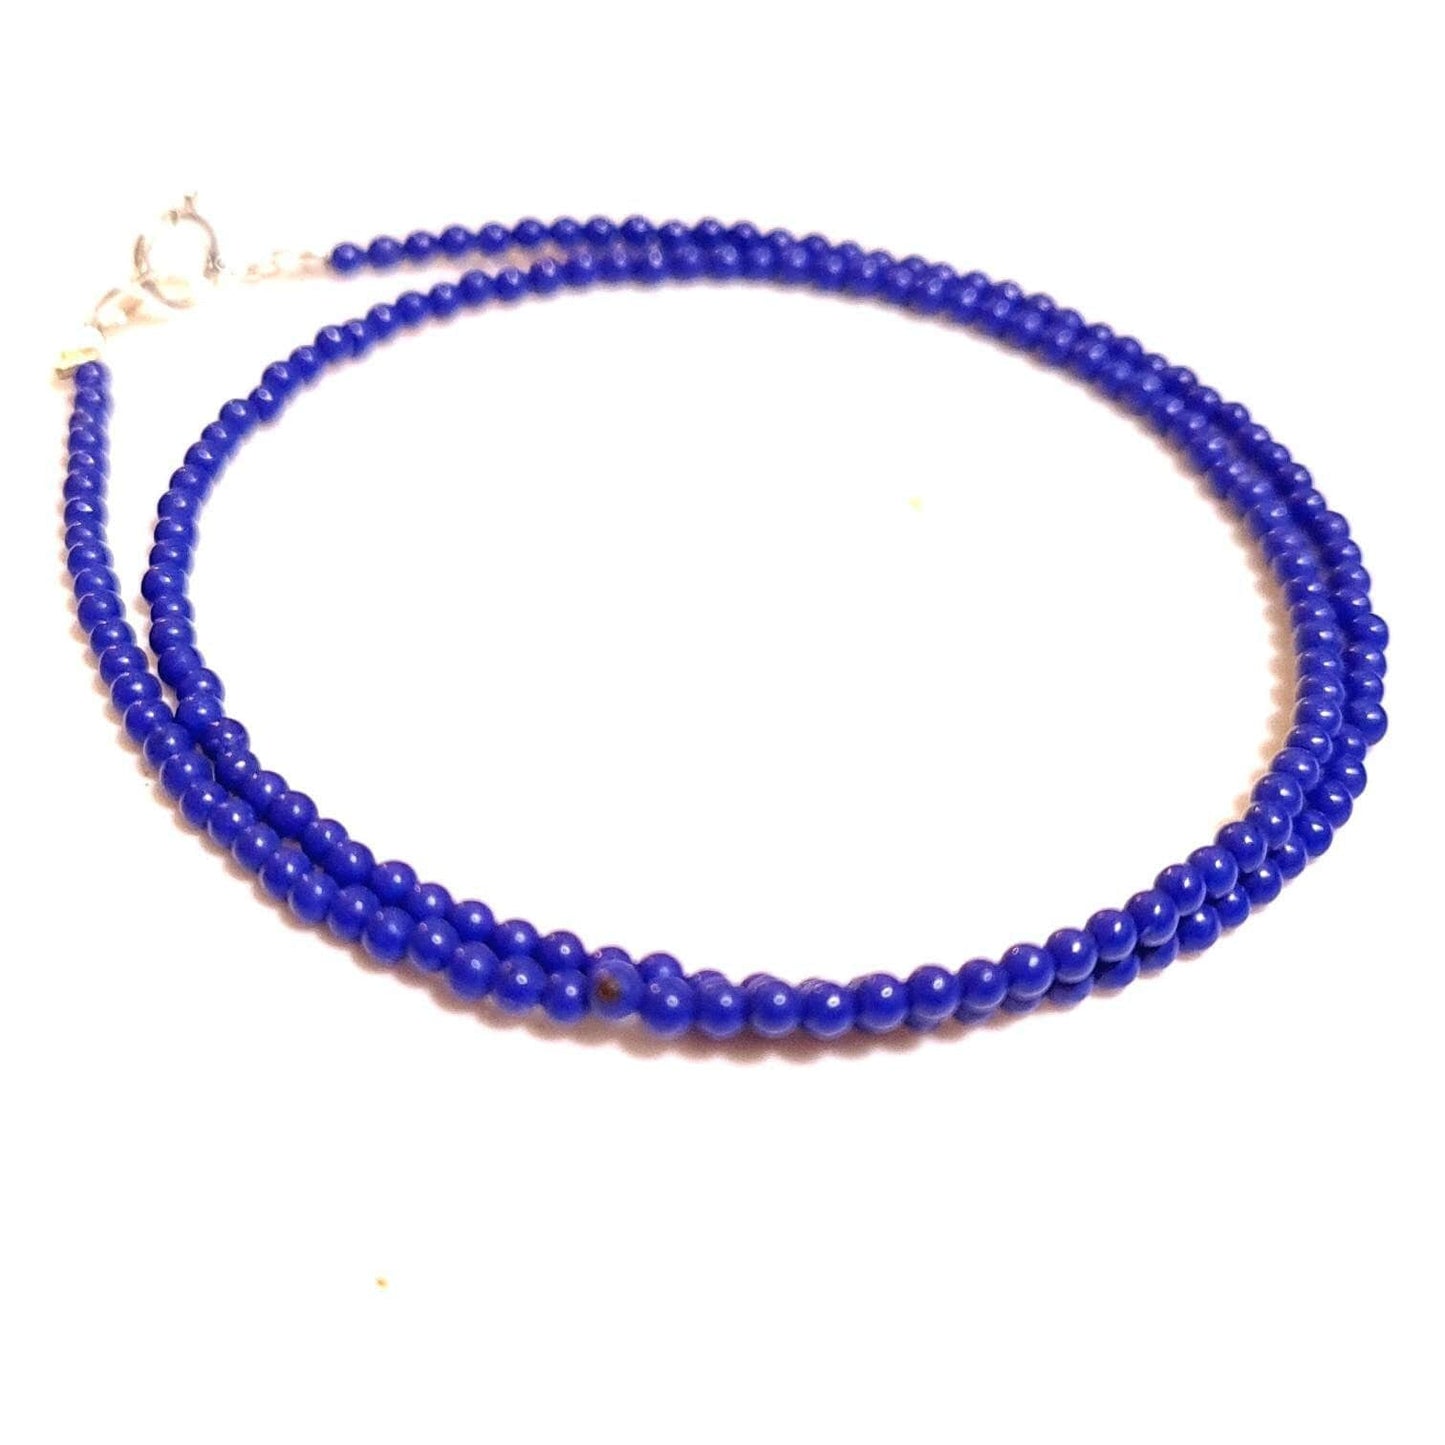 Genuine Lapis Lazuli 2mm smooth Round royal blue with 925 Sterling clasp Choker, Layering Necklace Gemstones gift for Man and women